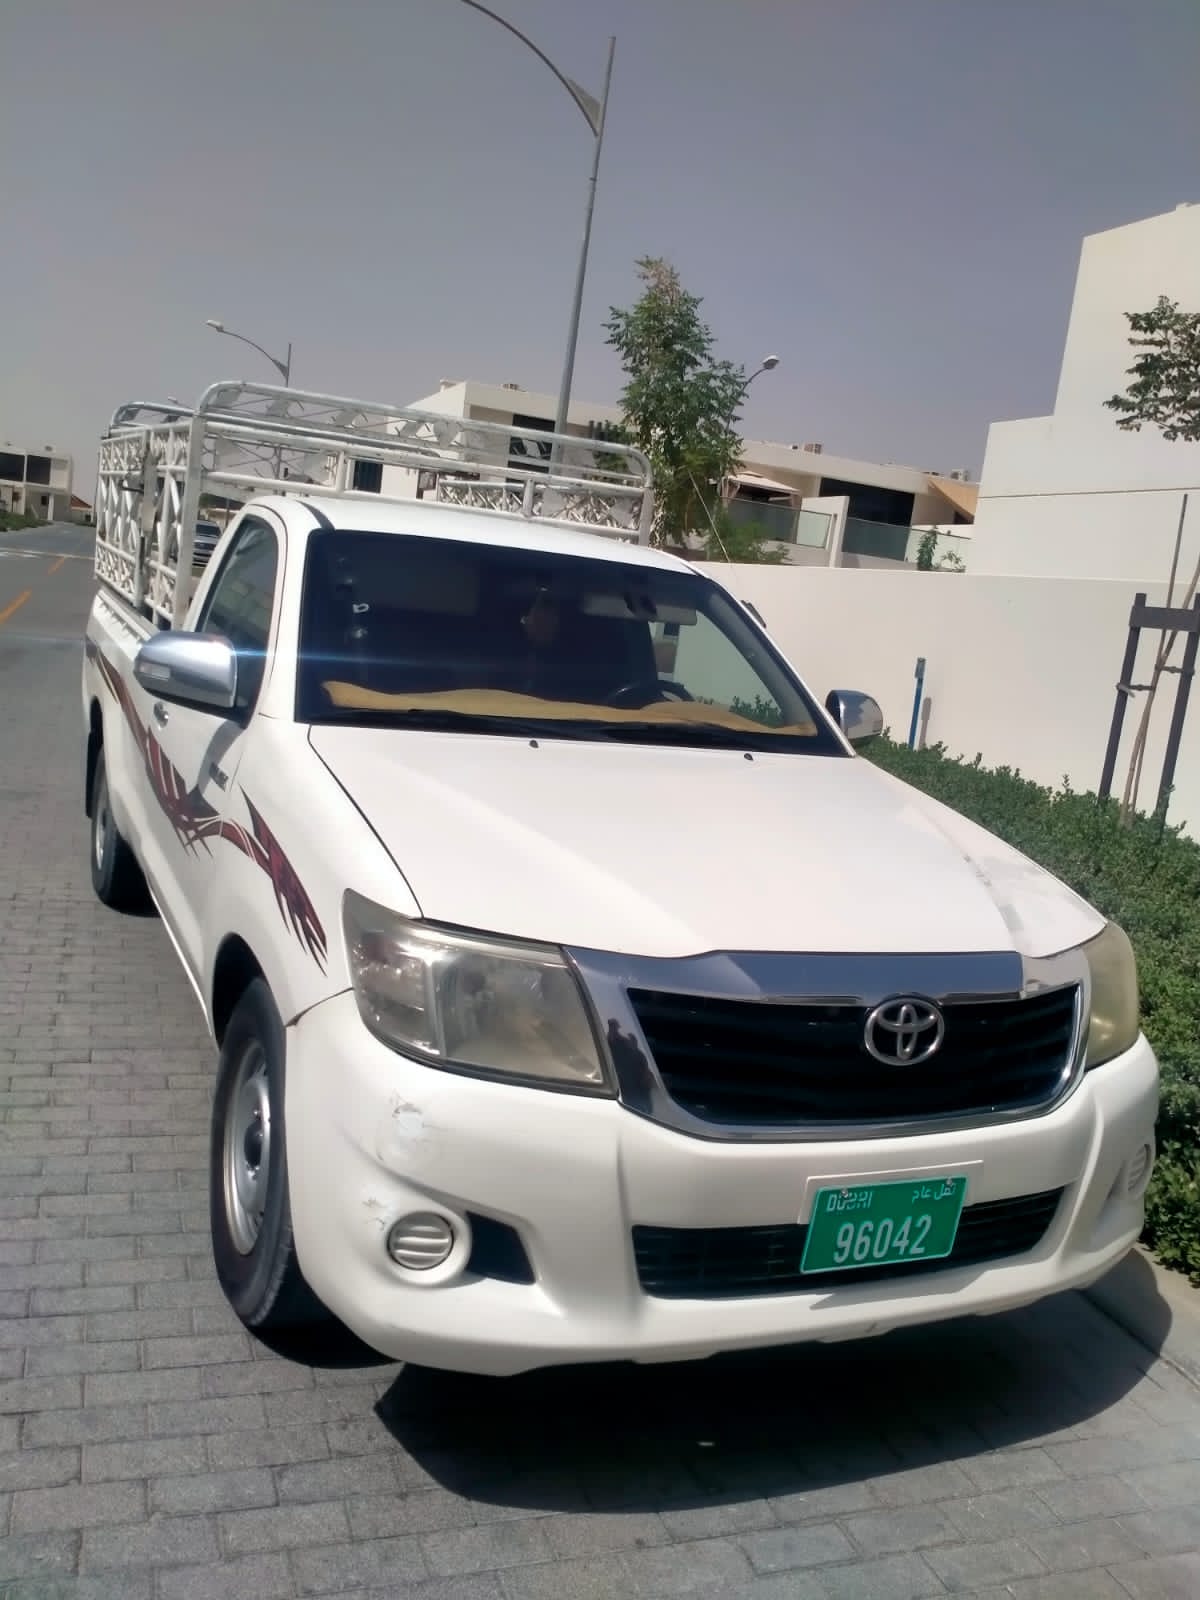 Movers and Packers in Sharjah | Movers And Packers In Al Ruwais | 3 Ton Pickup For Rent in Dubai | 1 Ton Pickup For Rent in Dubai